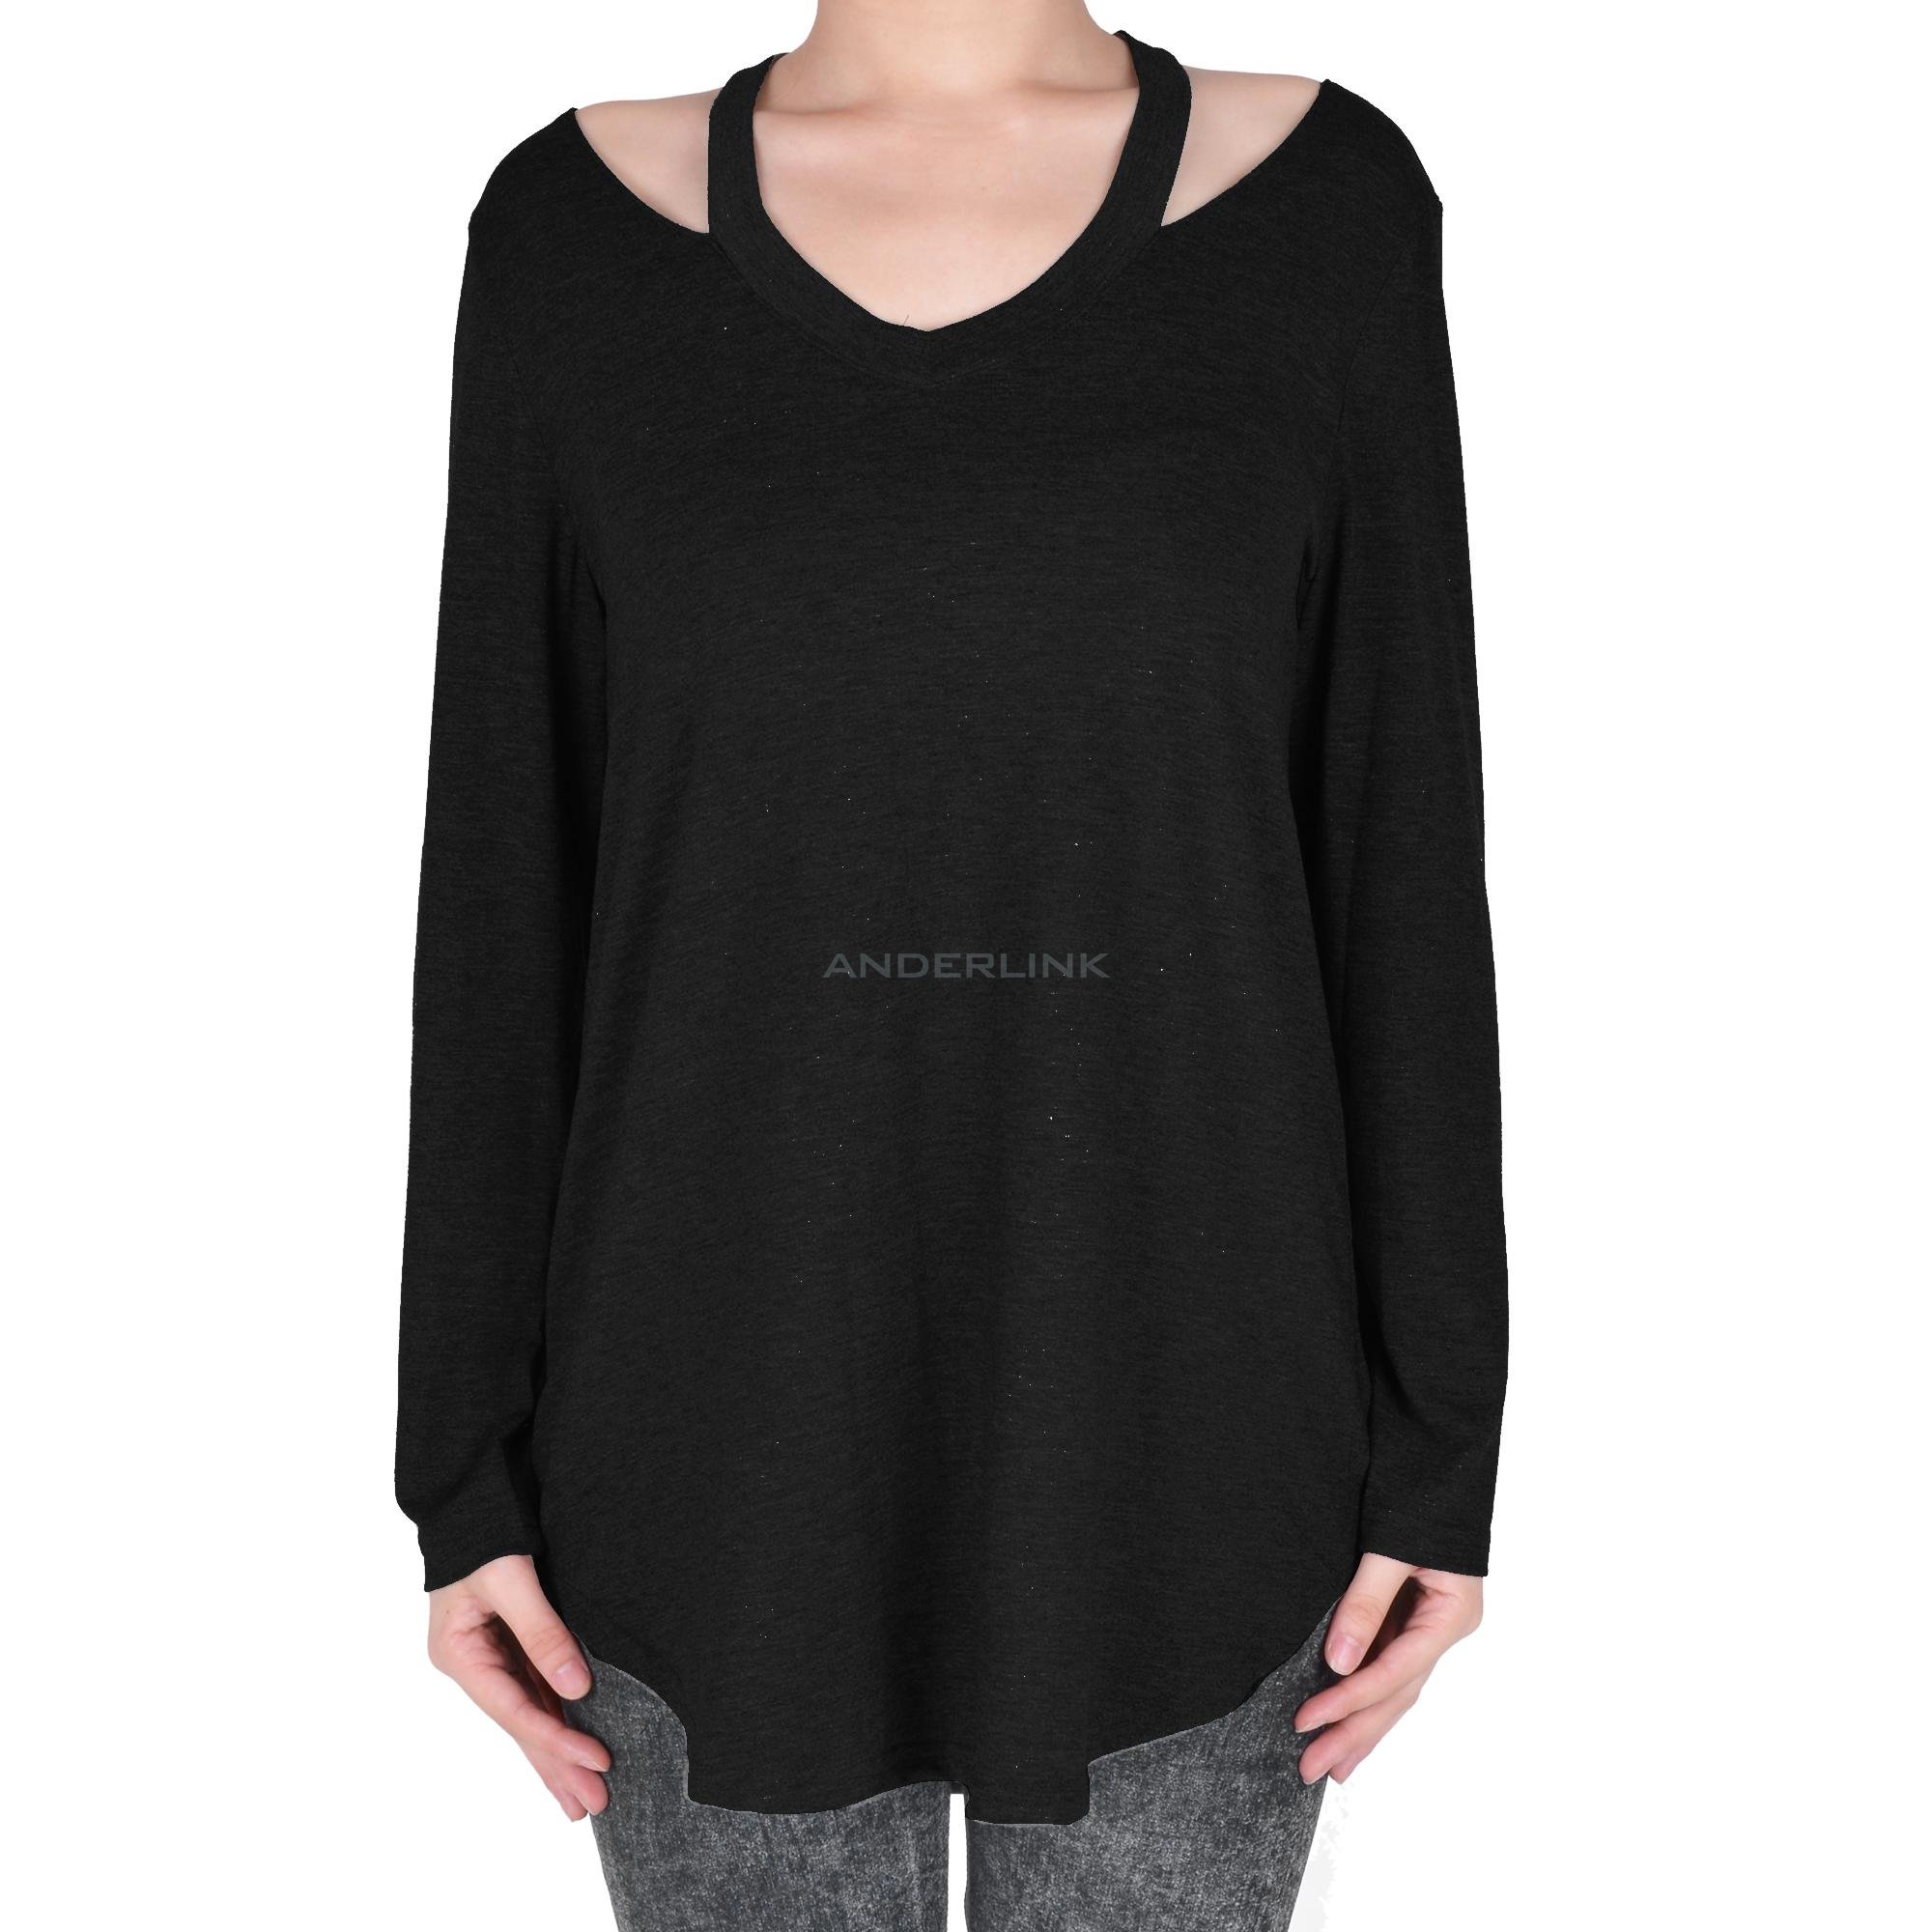 unknown New Stylish Women's Off Shoulder Long Sleeve V-Neck Tops T-Shirt Blouse